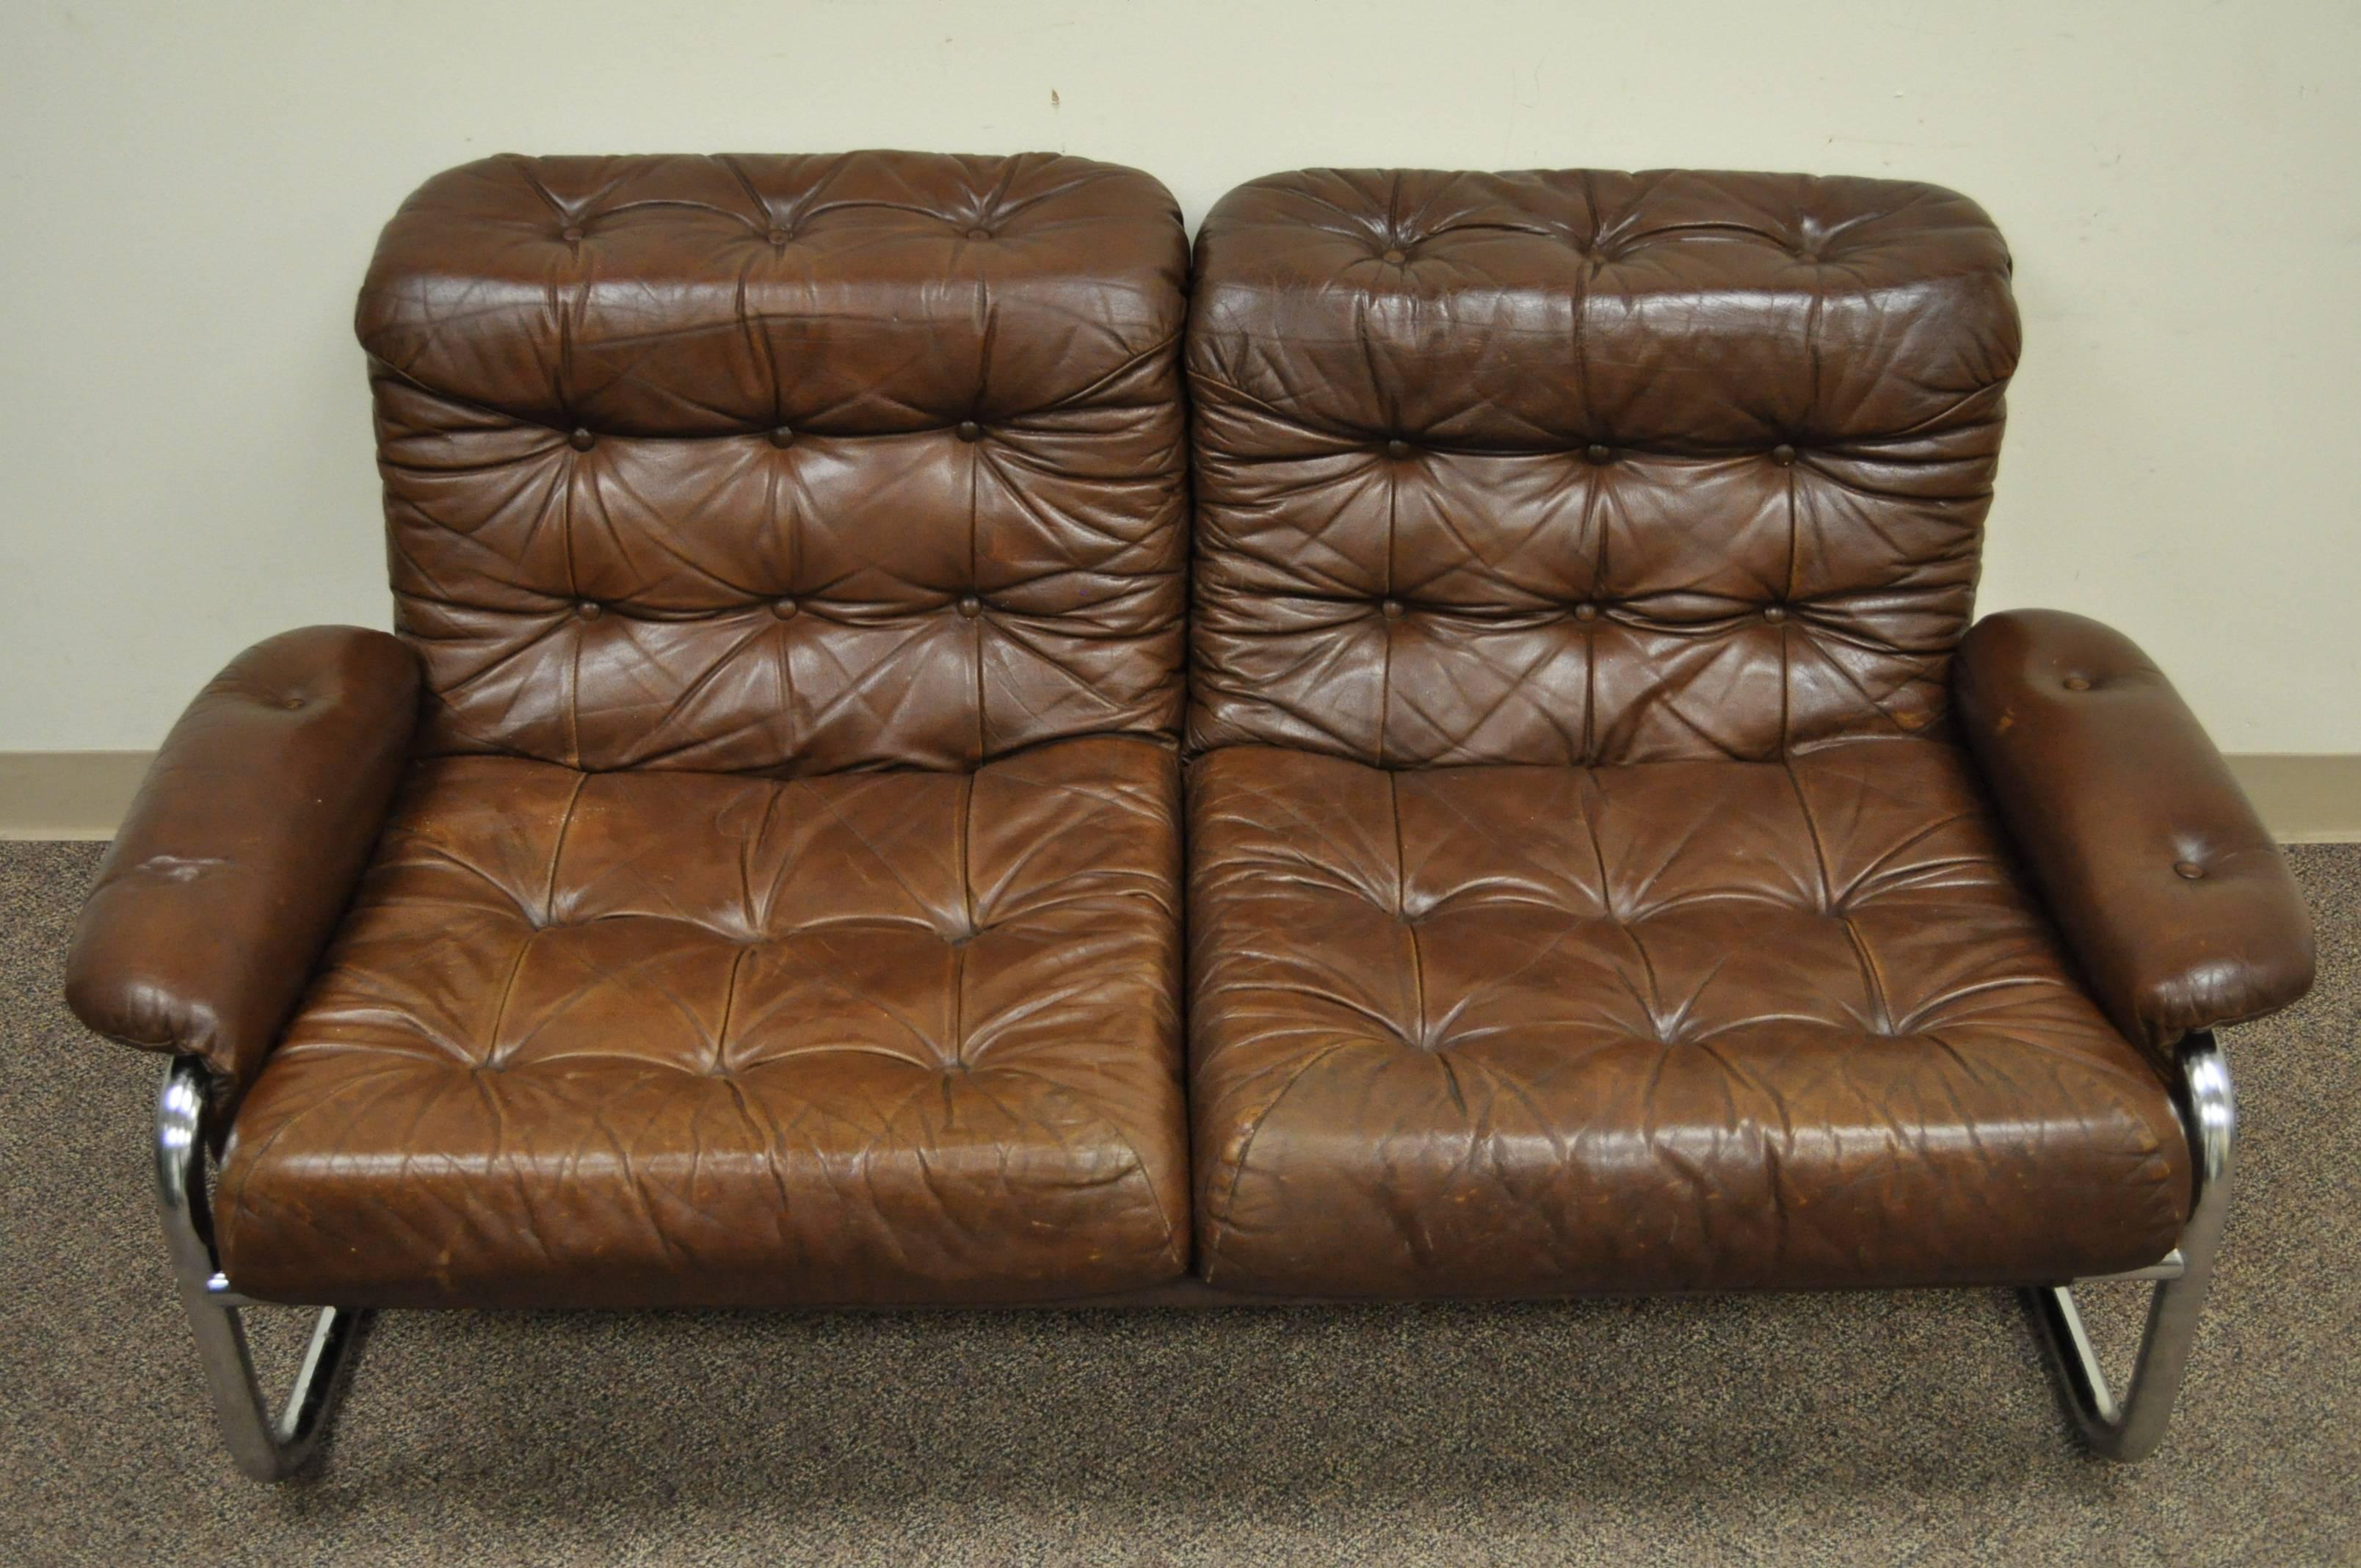 Vintage tubular chrome and brown tufted leather loveseat/settee. Item features a unique and shapely chrome frame with rolled arms and back and comfortable form. Maker is unconfirmed but reminiscent of the works of Rodney Kinsman.